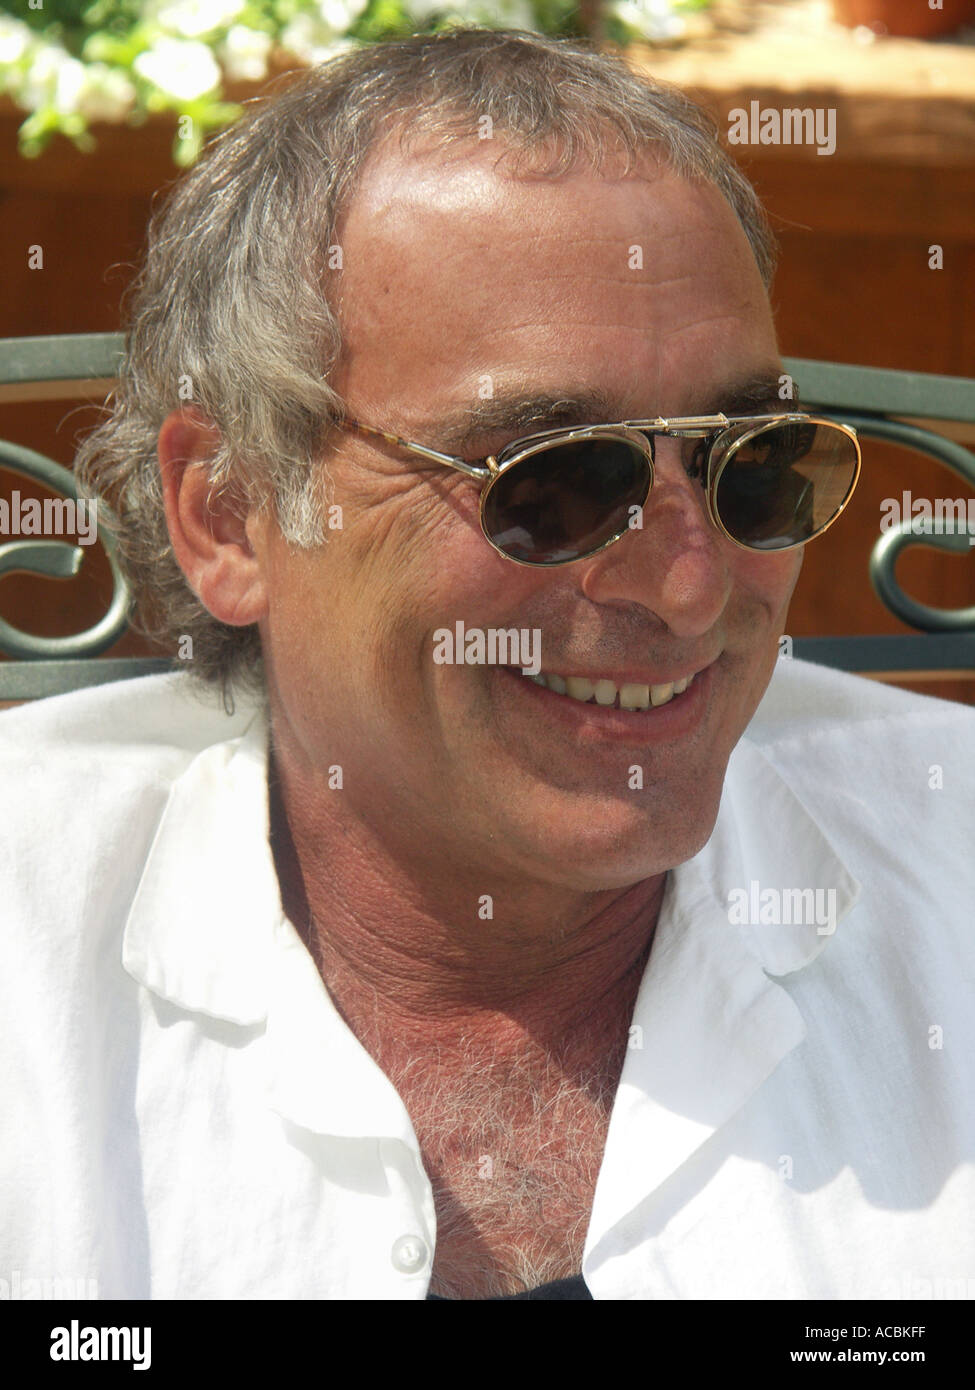 Smiling Middle Age Man in Sunglasses Stock Photo